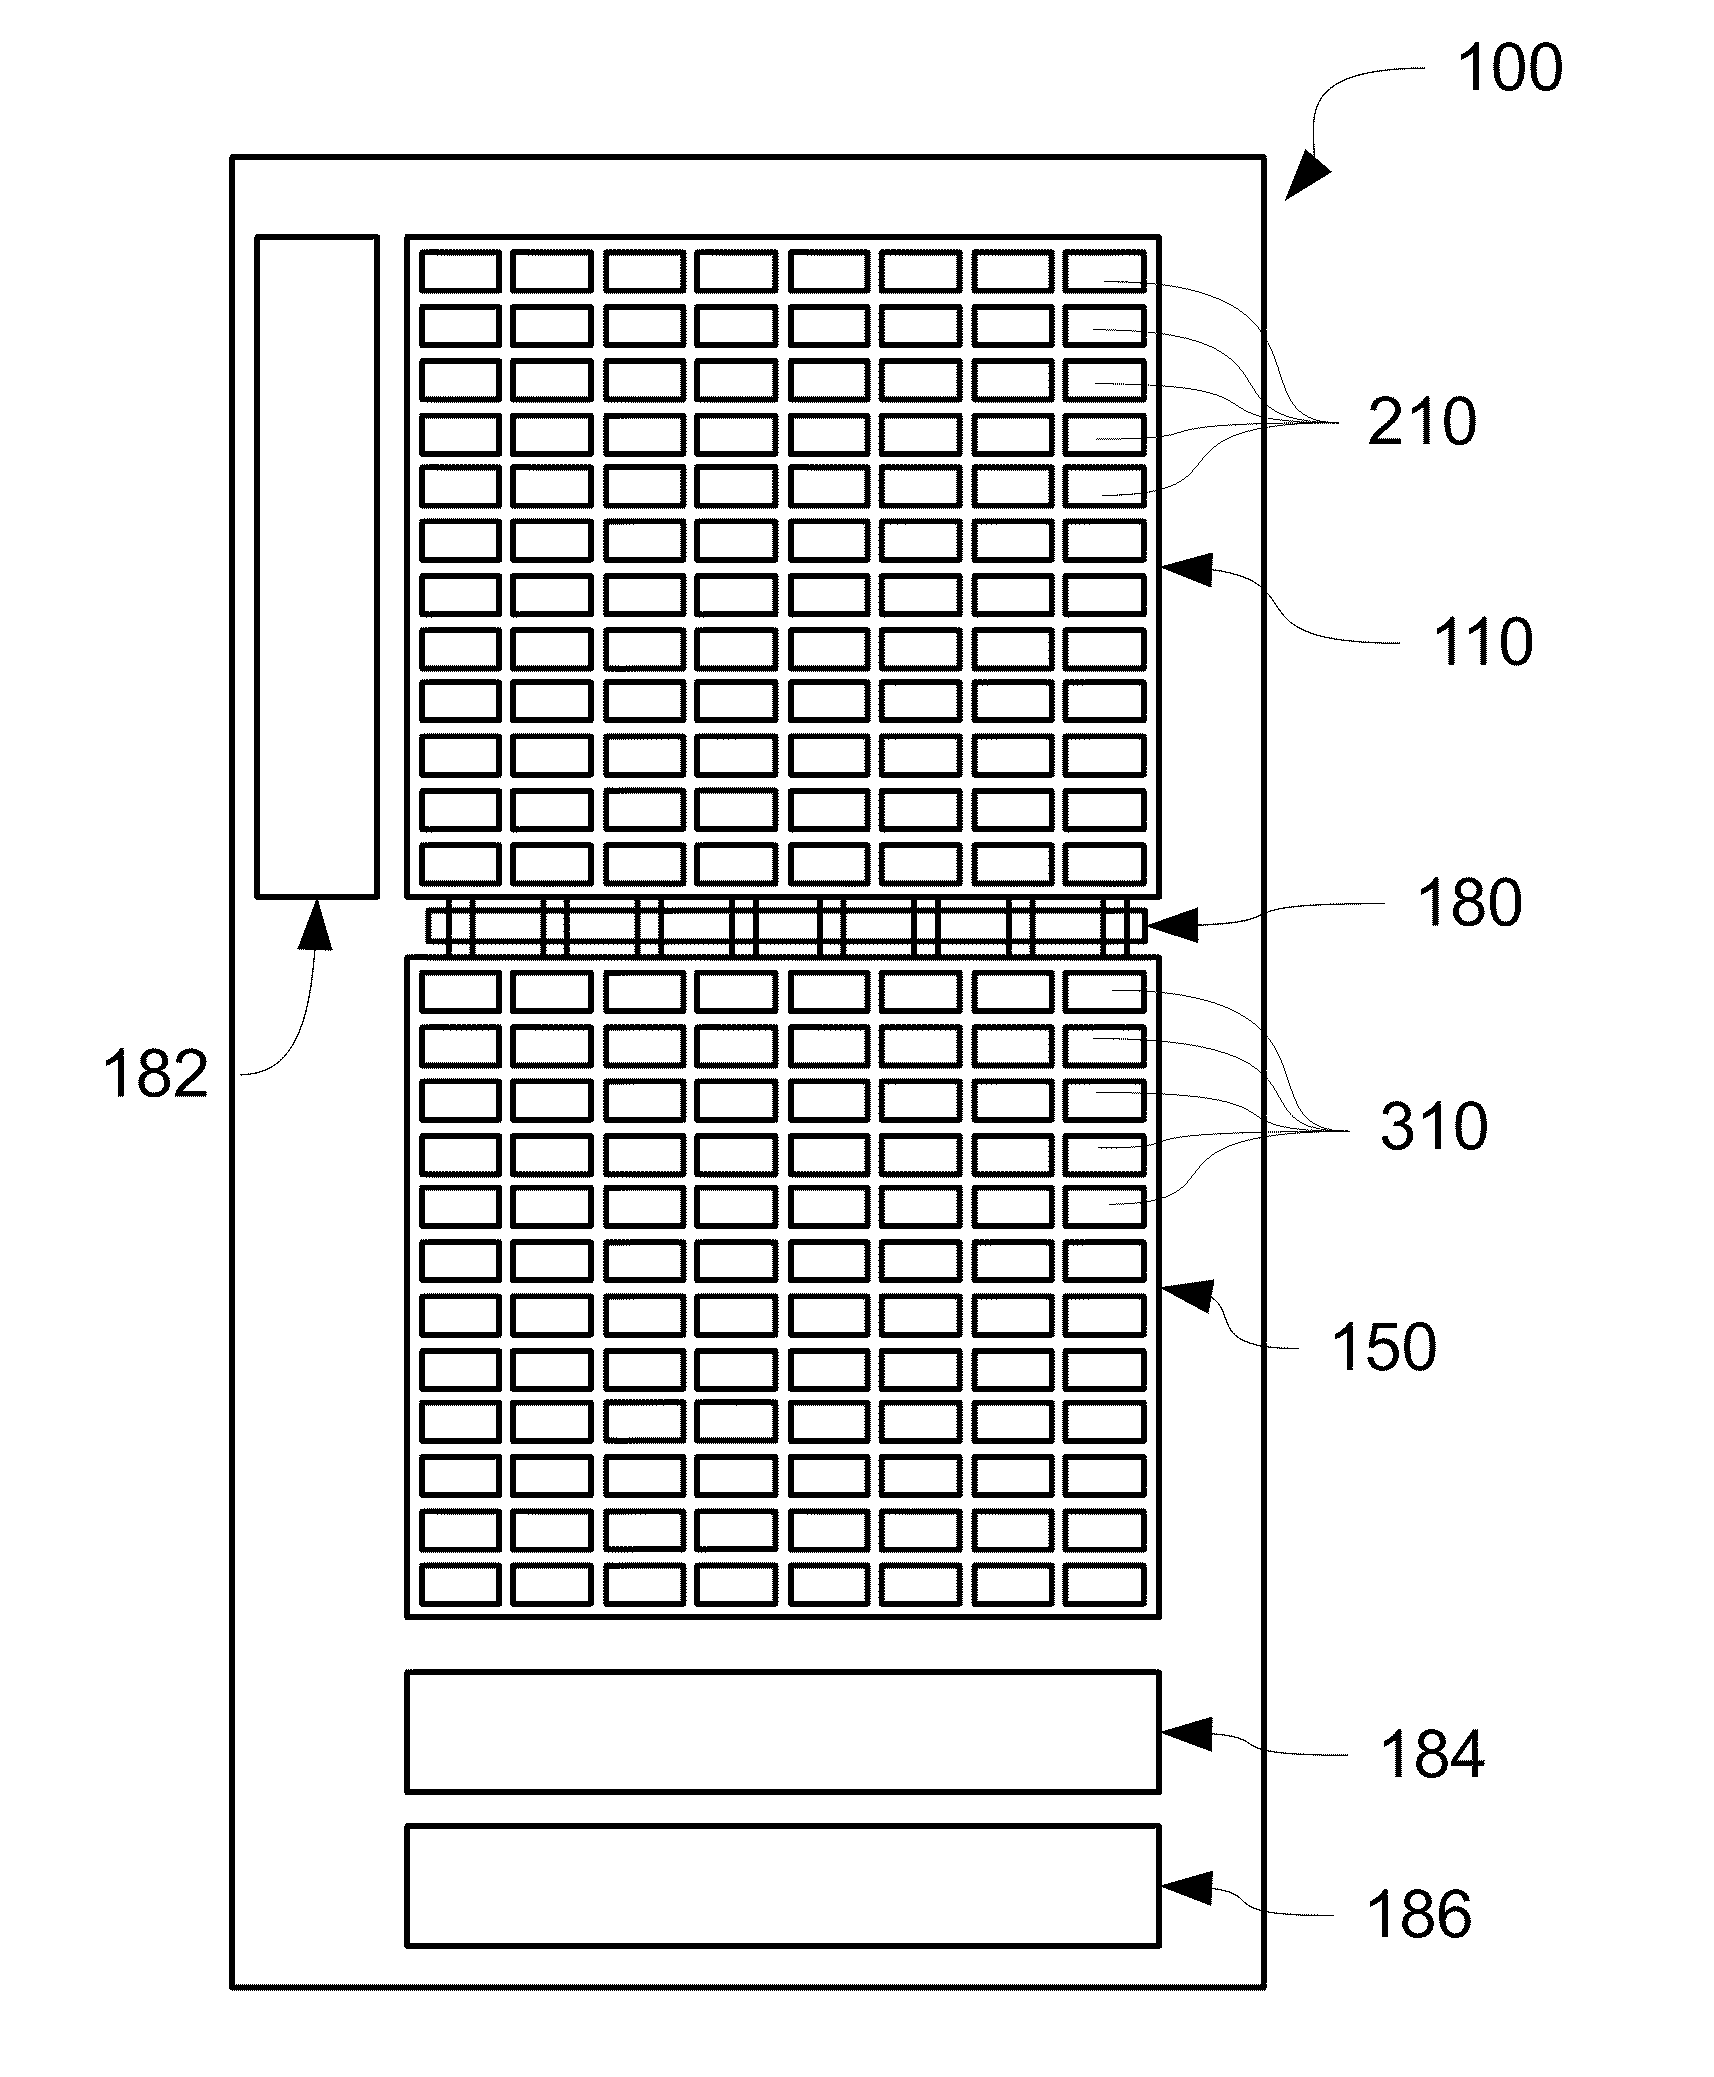 Demodulation Sensor with Separate Pixel and Storage Arrays